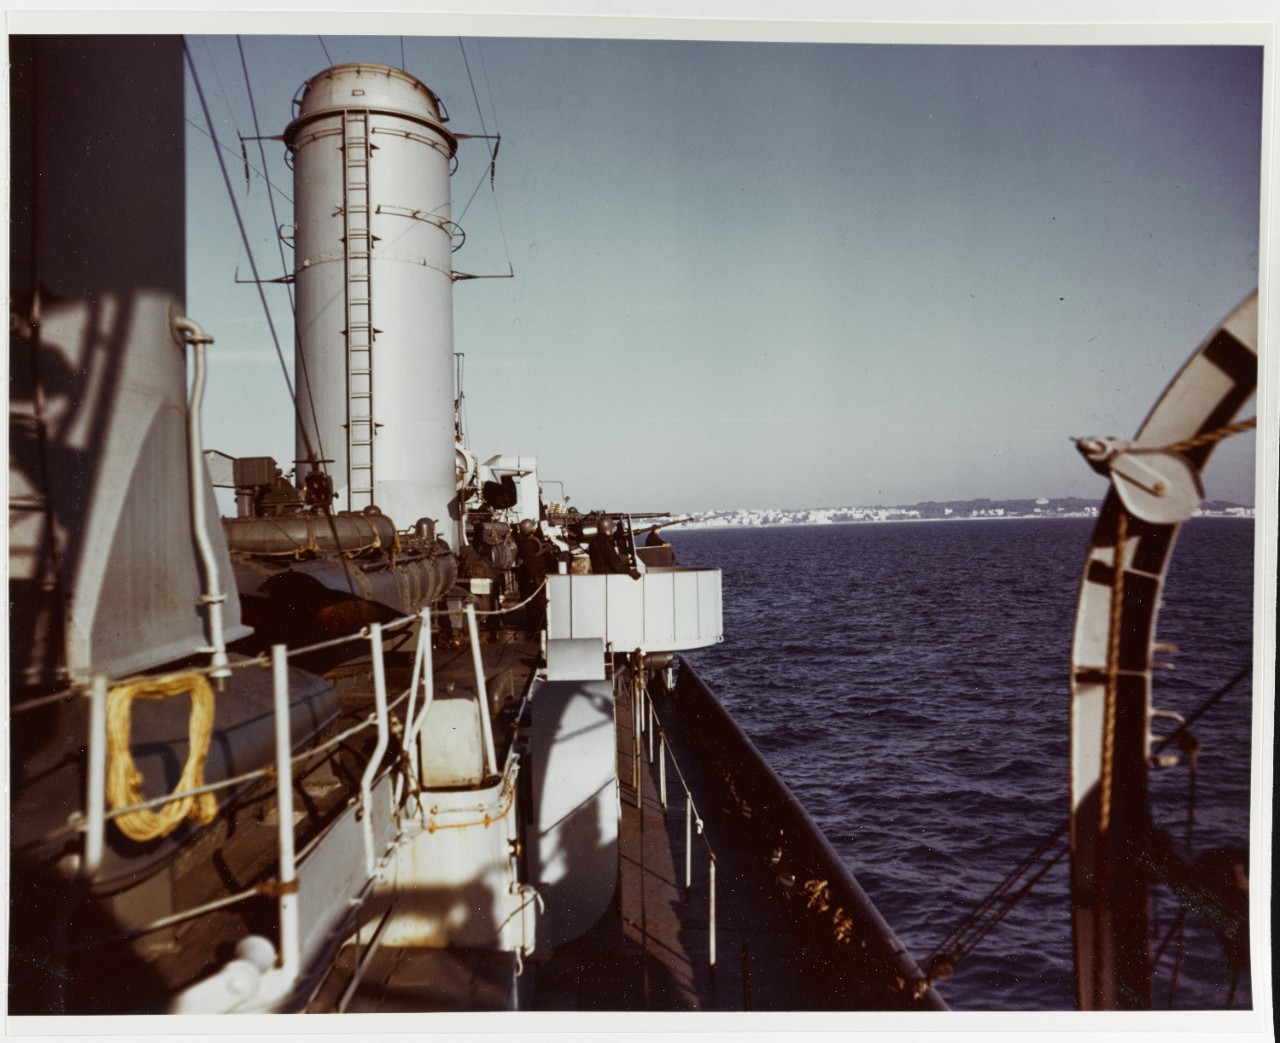 Livermore’s gun crews stand alert during a patrol of the waters off Anzio, which can be seen in the background, circa March 1944 by Combat Photo Unit Ten. (U.S. Navy Photograph 80-G-K-13779, National Archives and Records Administration, Still Pic...